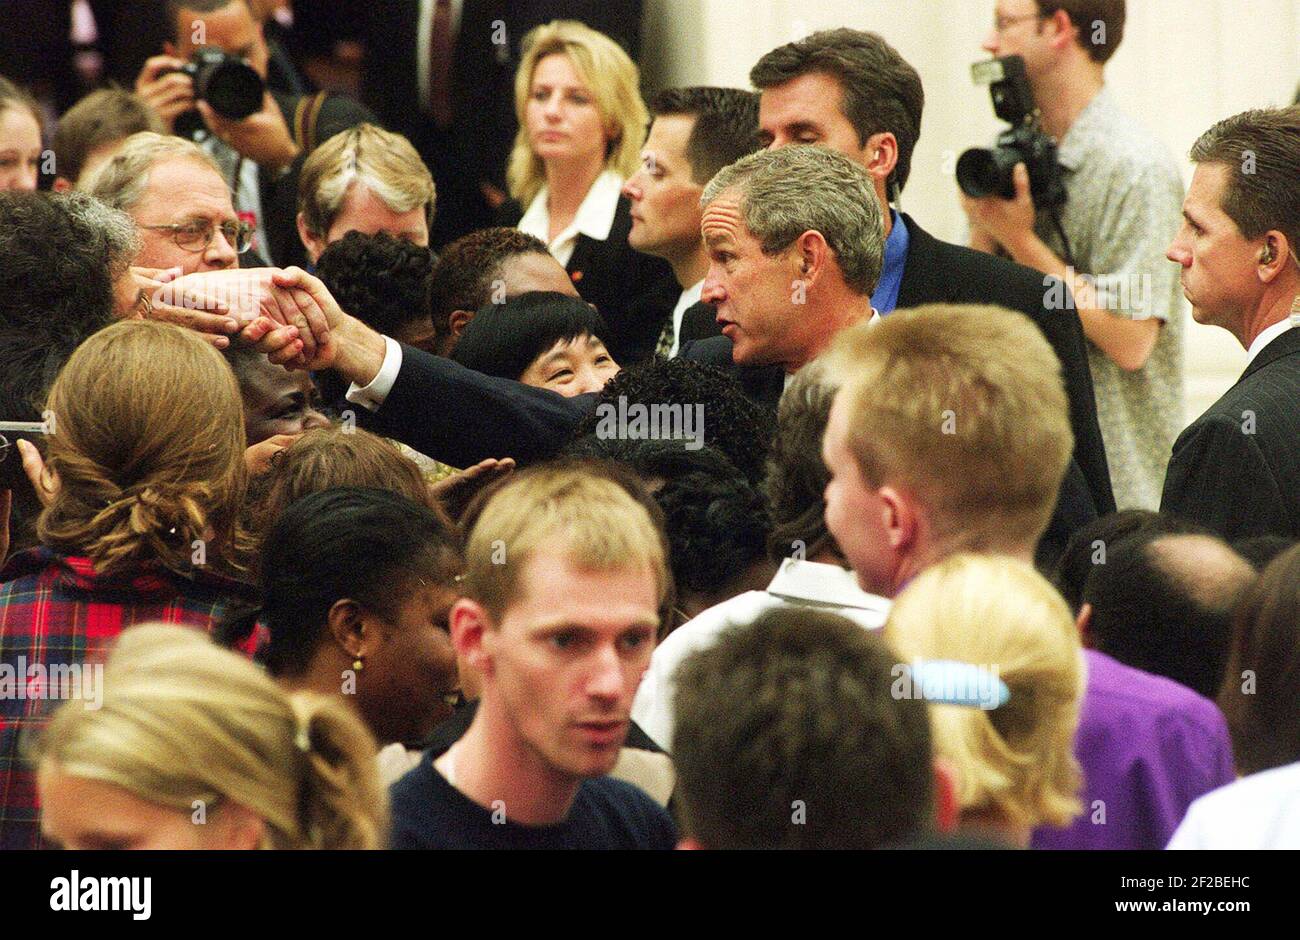 US President Bush shakes hands with members of the public during his visit to the British Museum in London Thursday July 19, 2001. The President is on a visit to the British capital, and was later going on to have lunch with Britain's Queen Elizabeth II and talks with Prime Minister Tony Blair. (AP Photo/Tom Pilston, POOL) Stock Photo